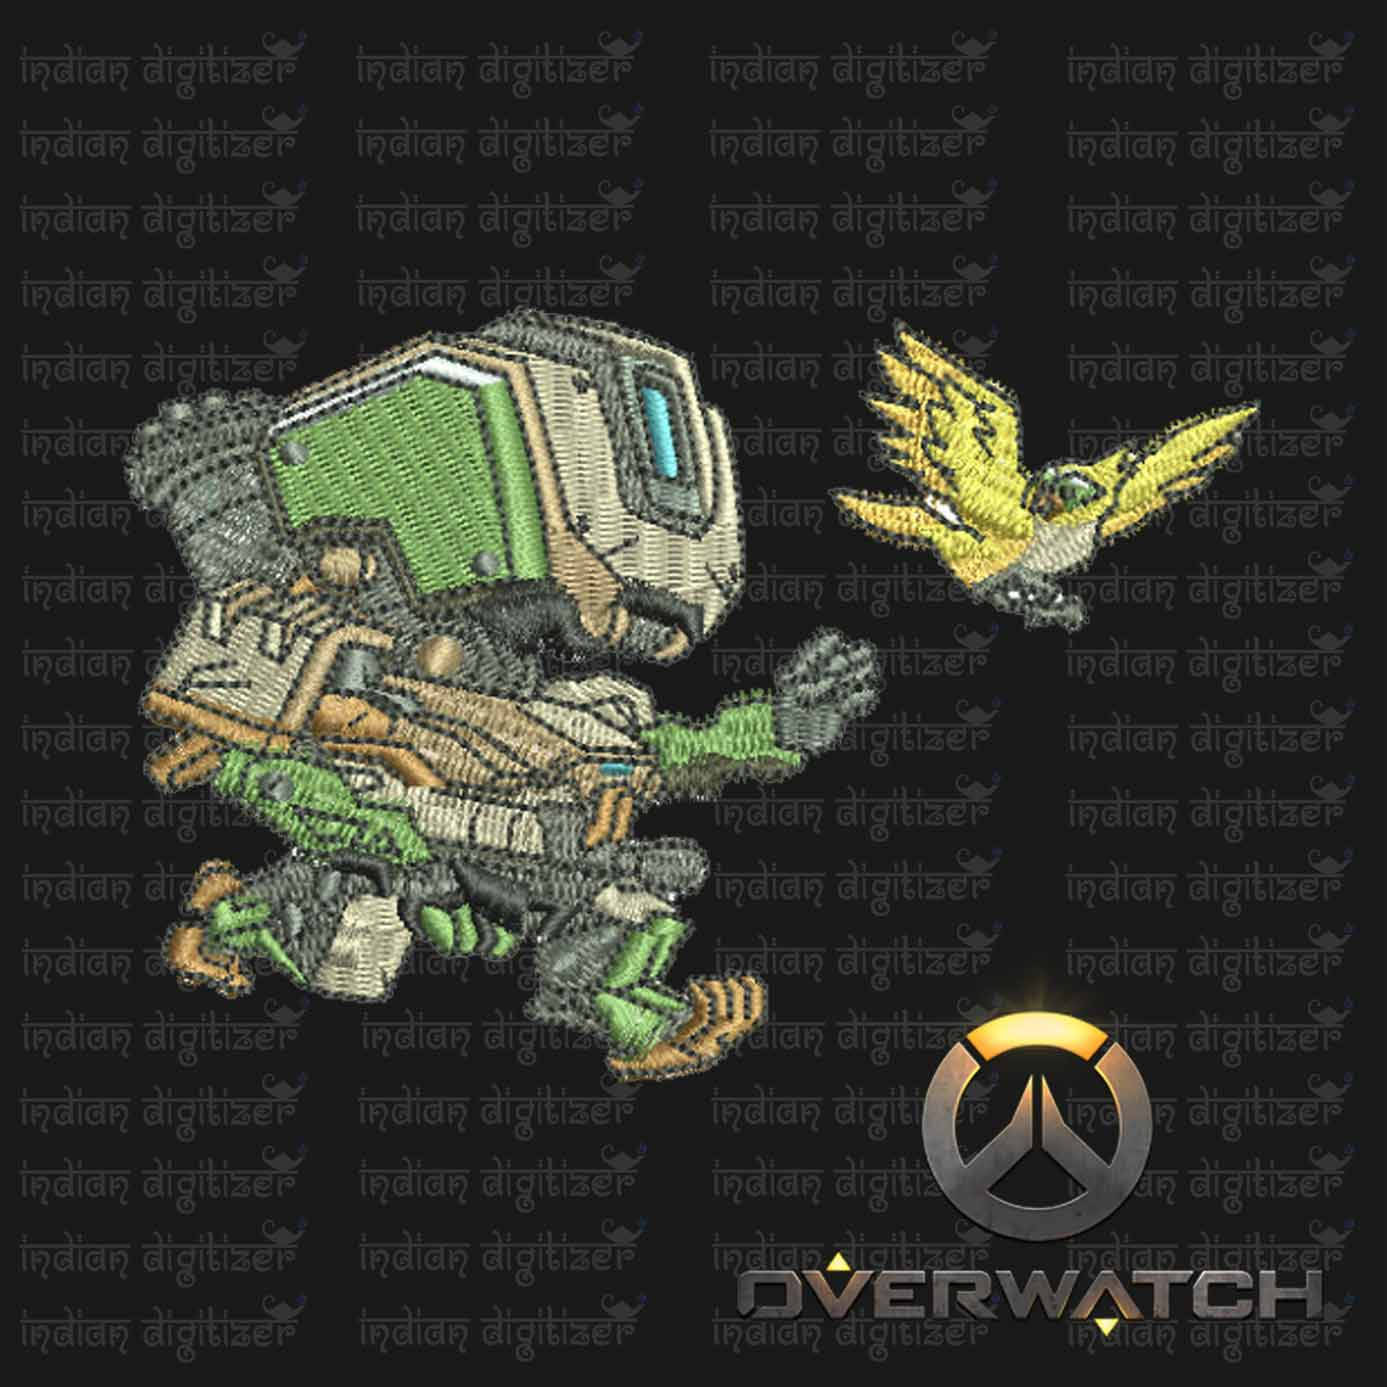 Overwatch Embroidery Designs - Bastion individual character for 4x4in hoop - resizable with freely downloadable software.